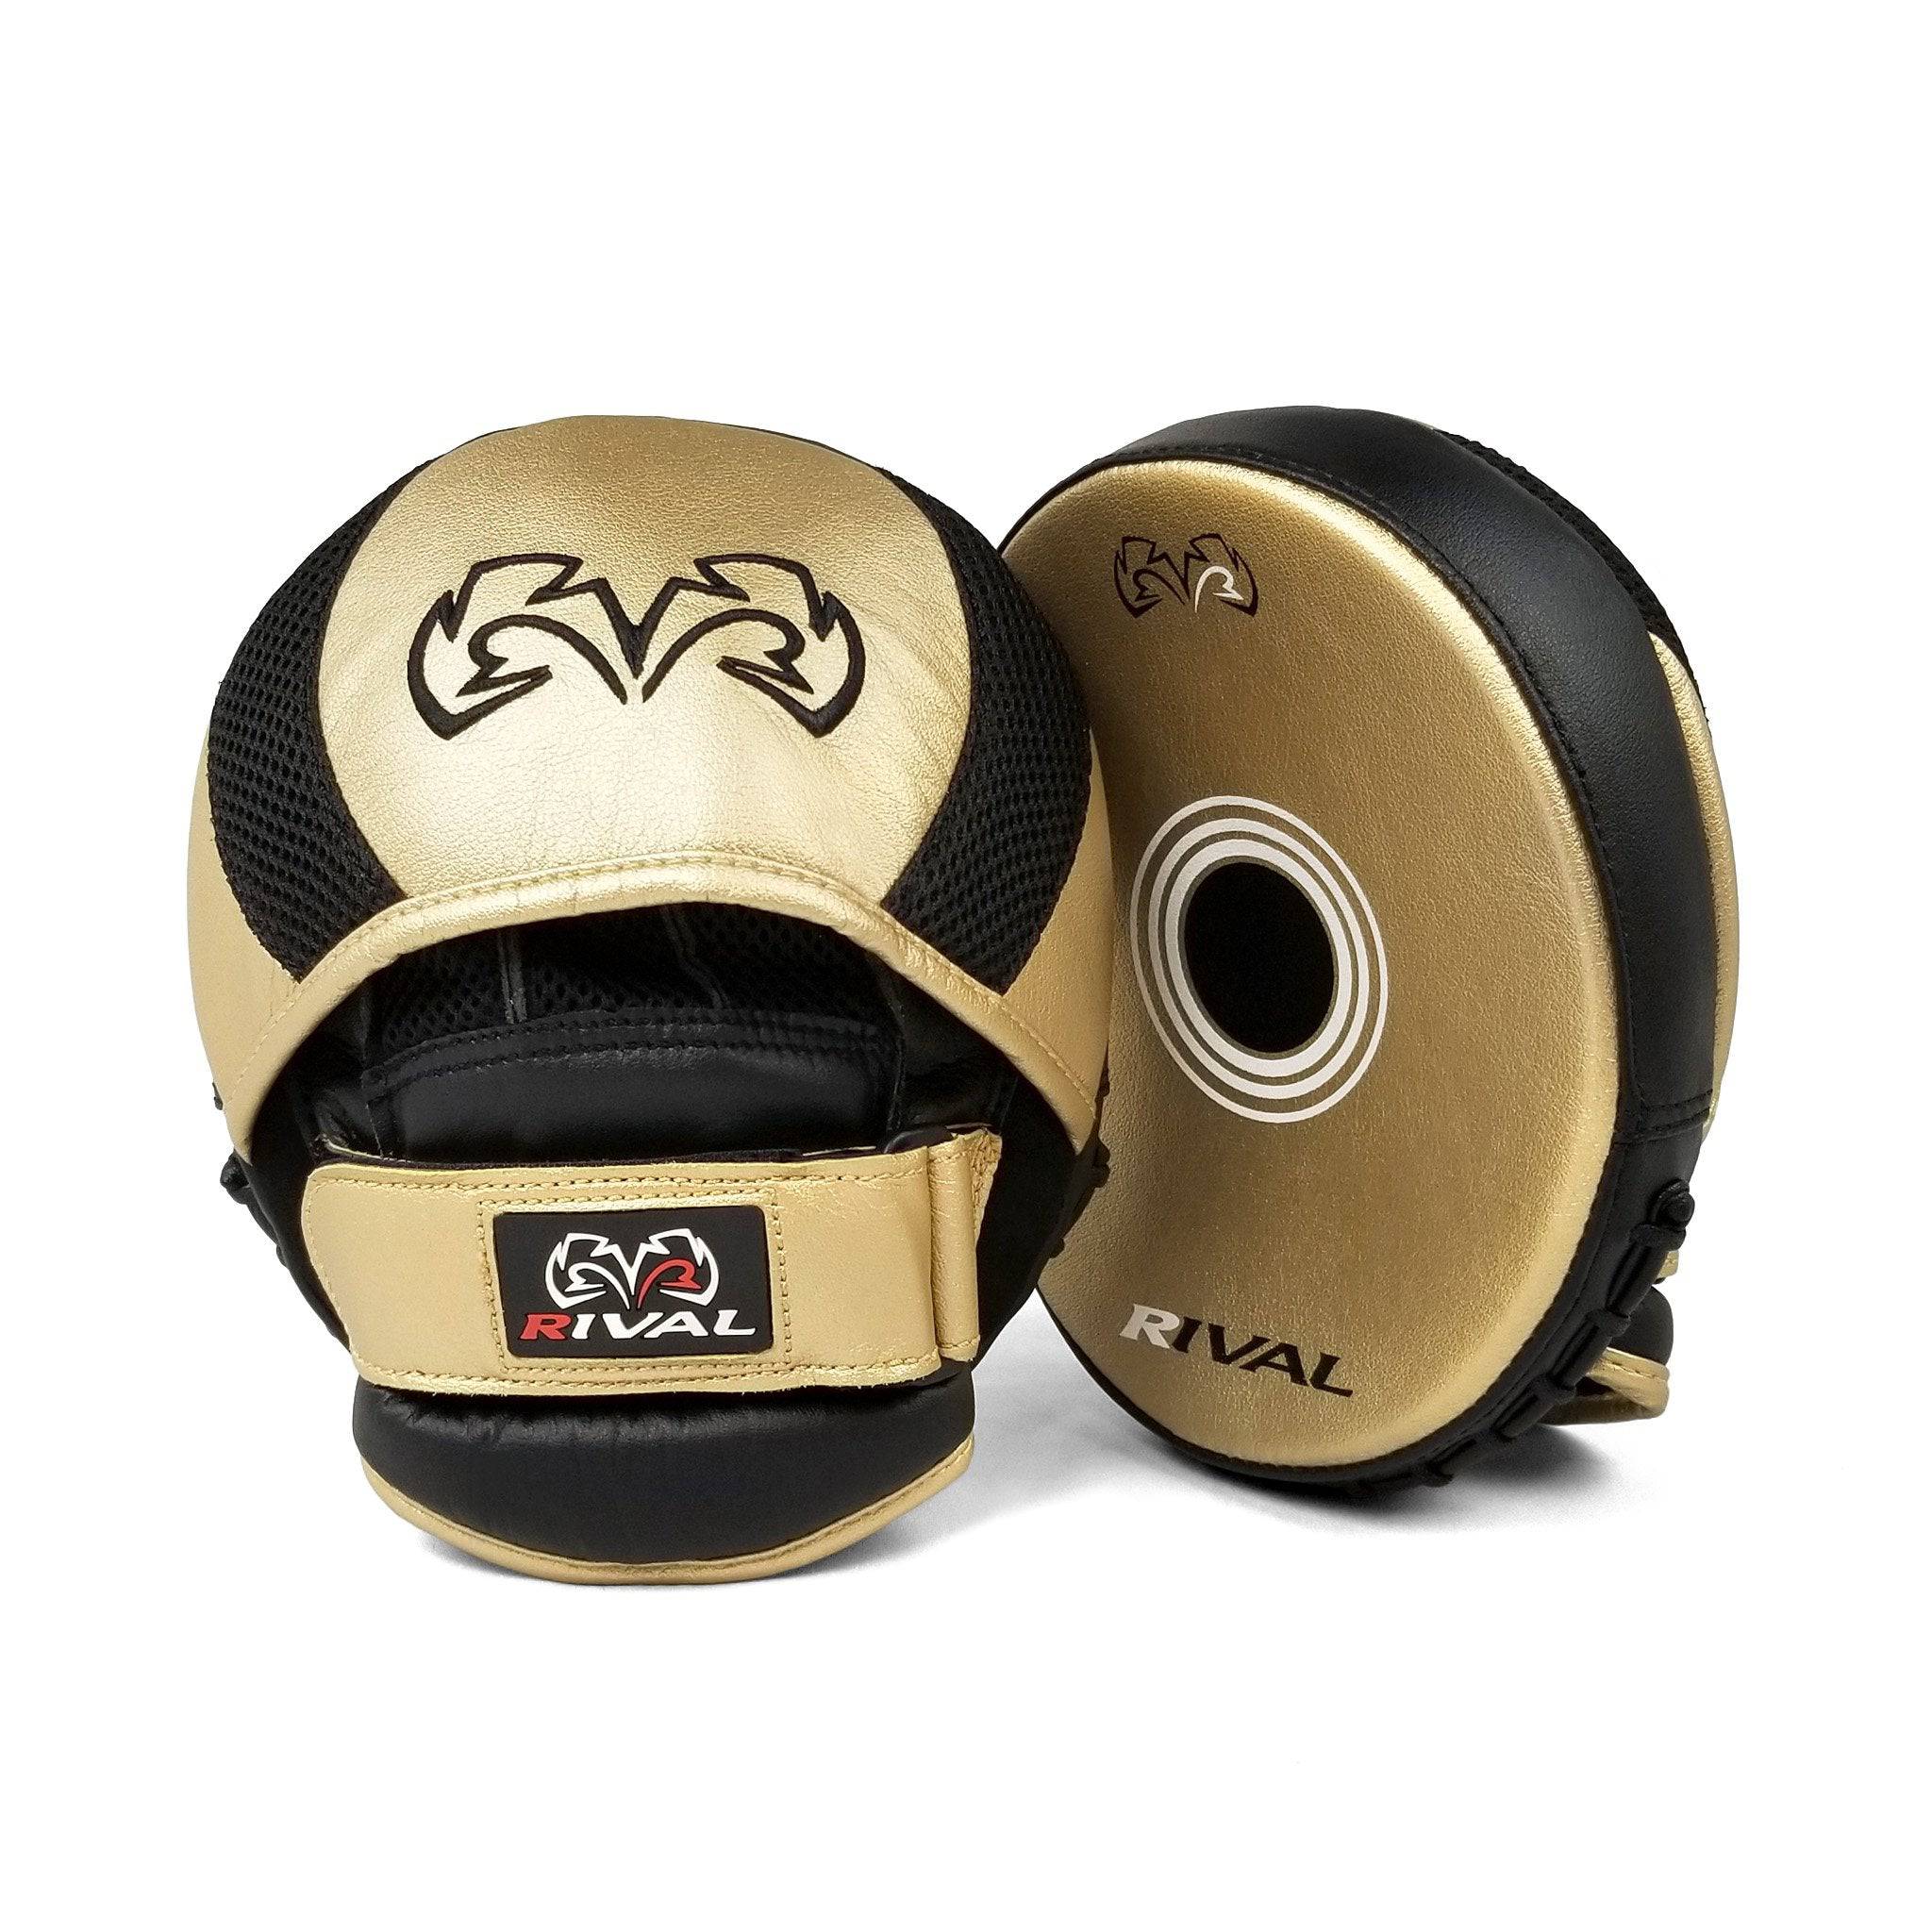 Rival | Punch Mitts - RPM11 Evolution - XTC Fitness - Exercise Equipment Superstore - Canada - Punch Mitts